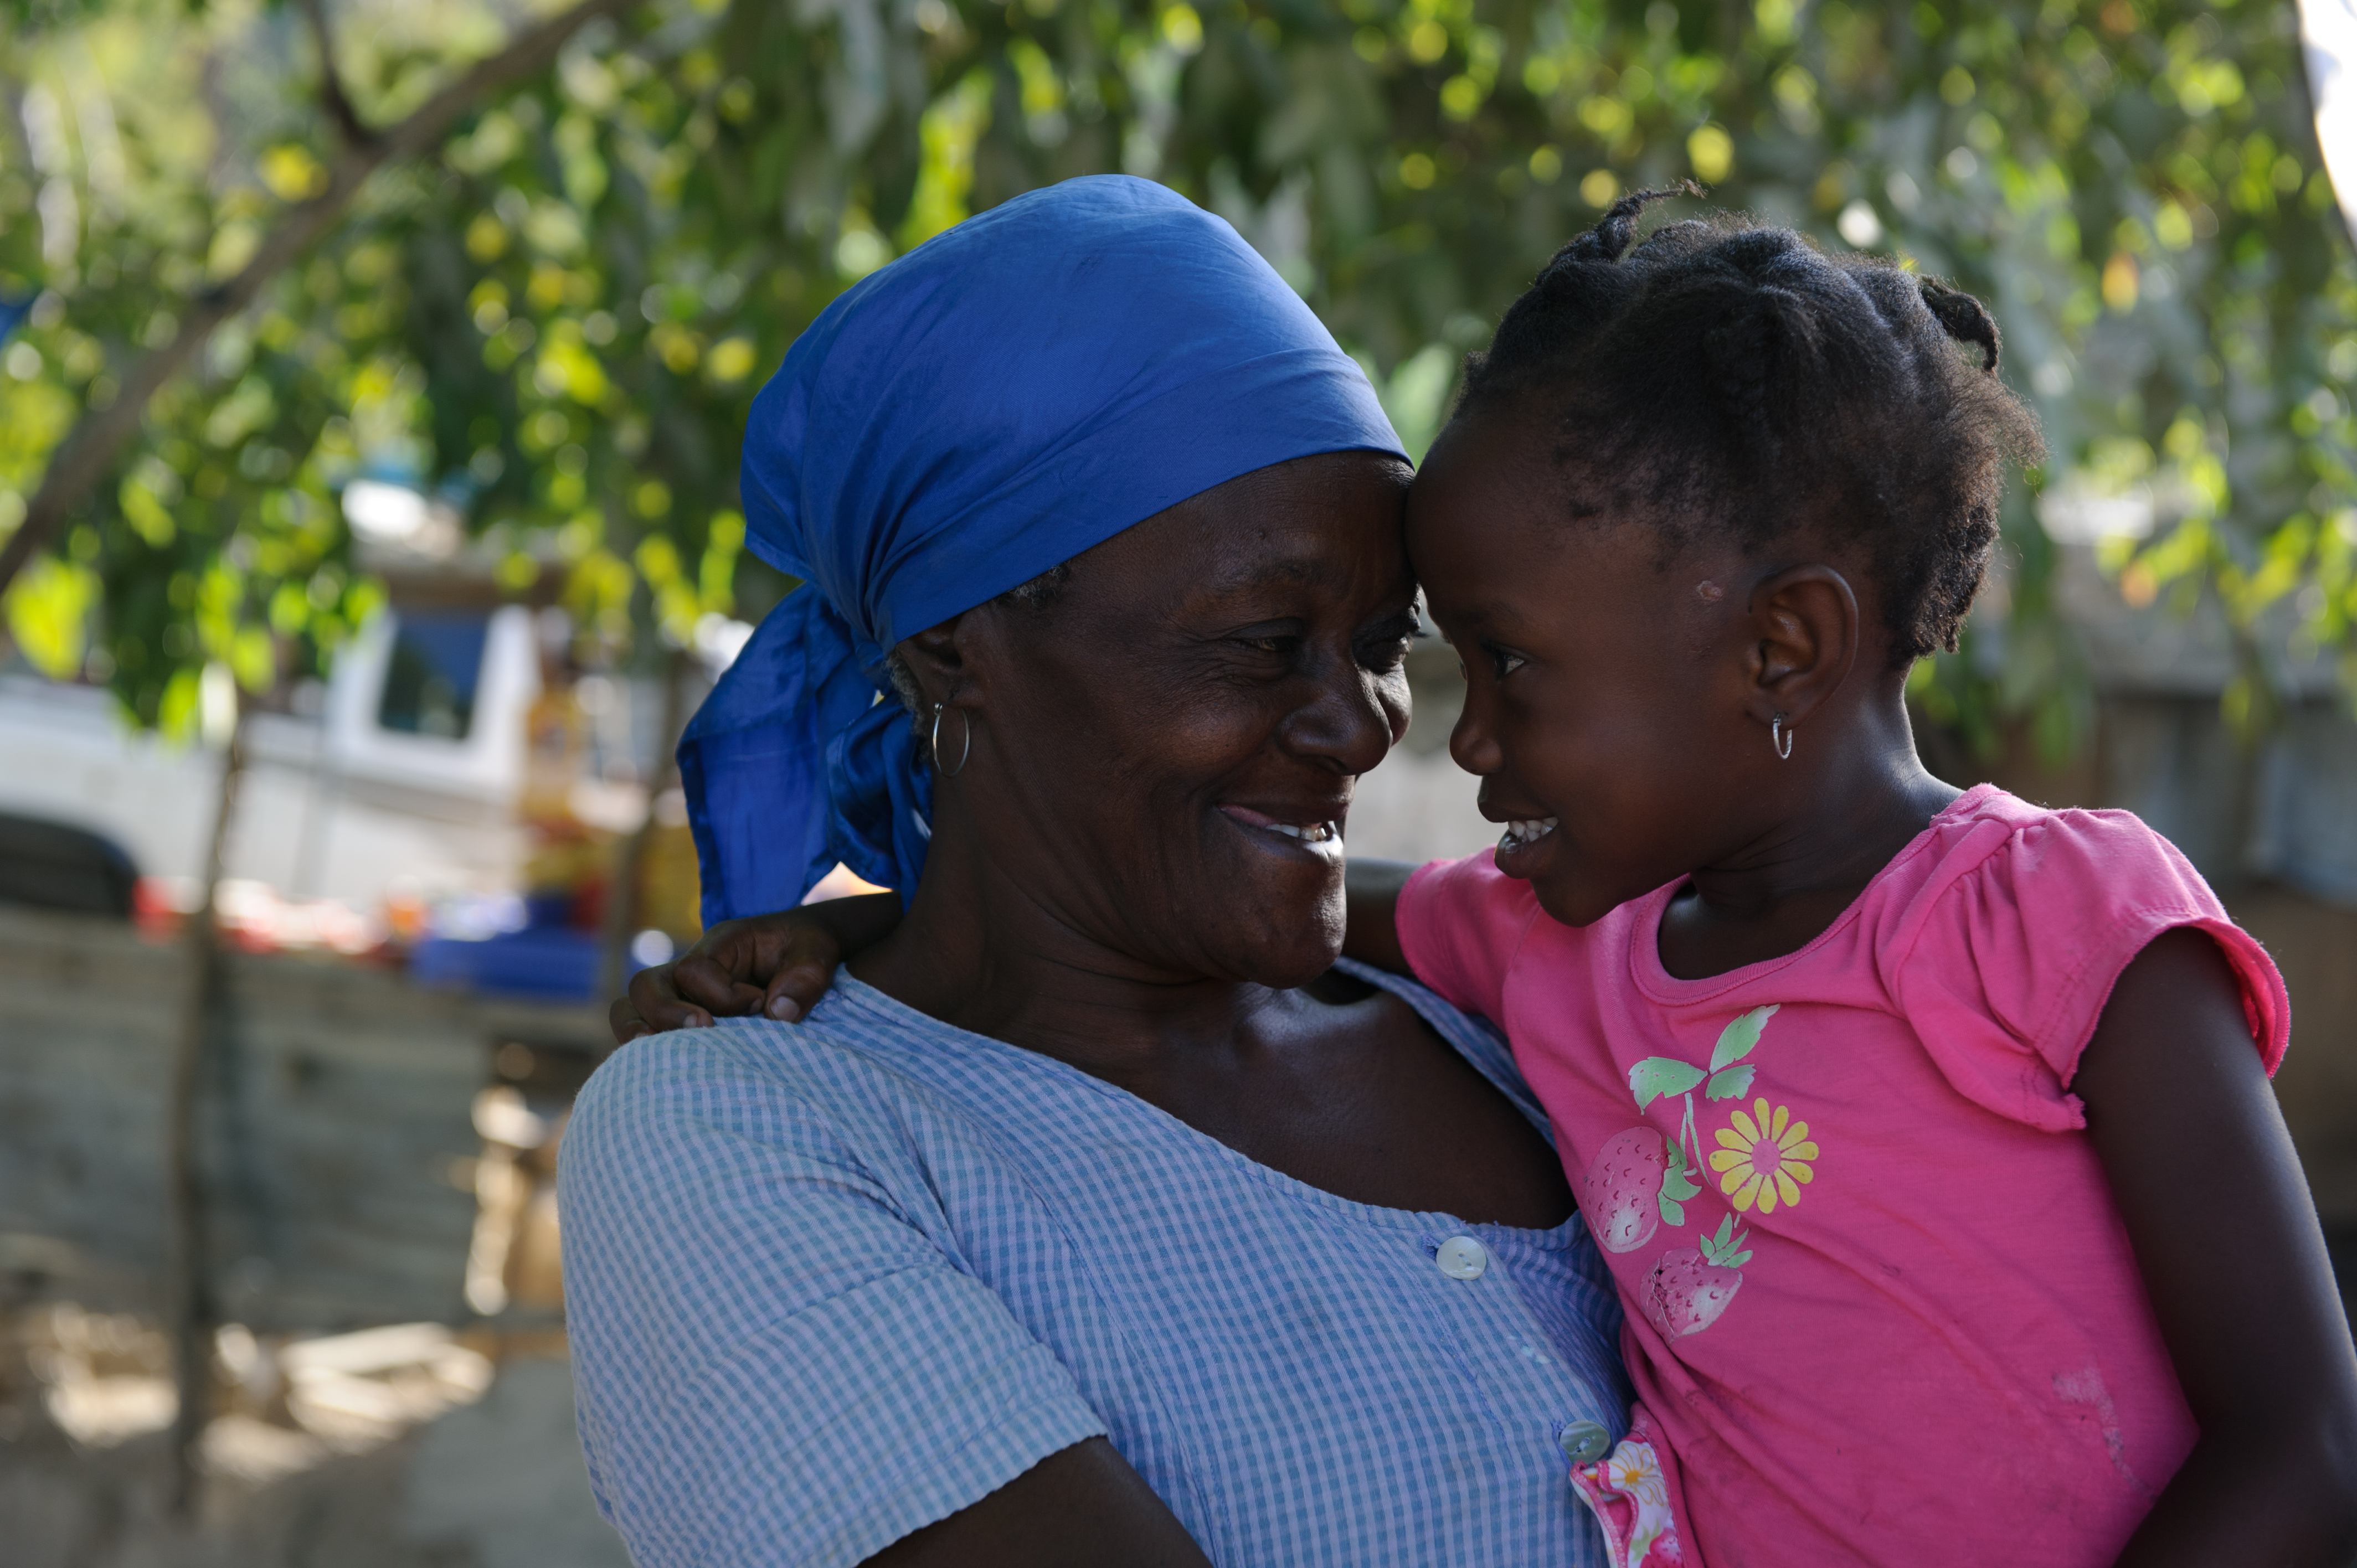 An older woman from Haiti with a child.